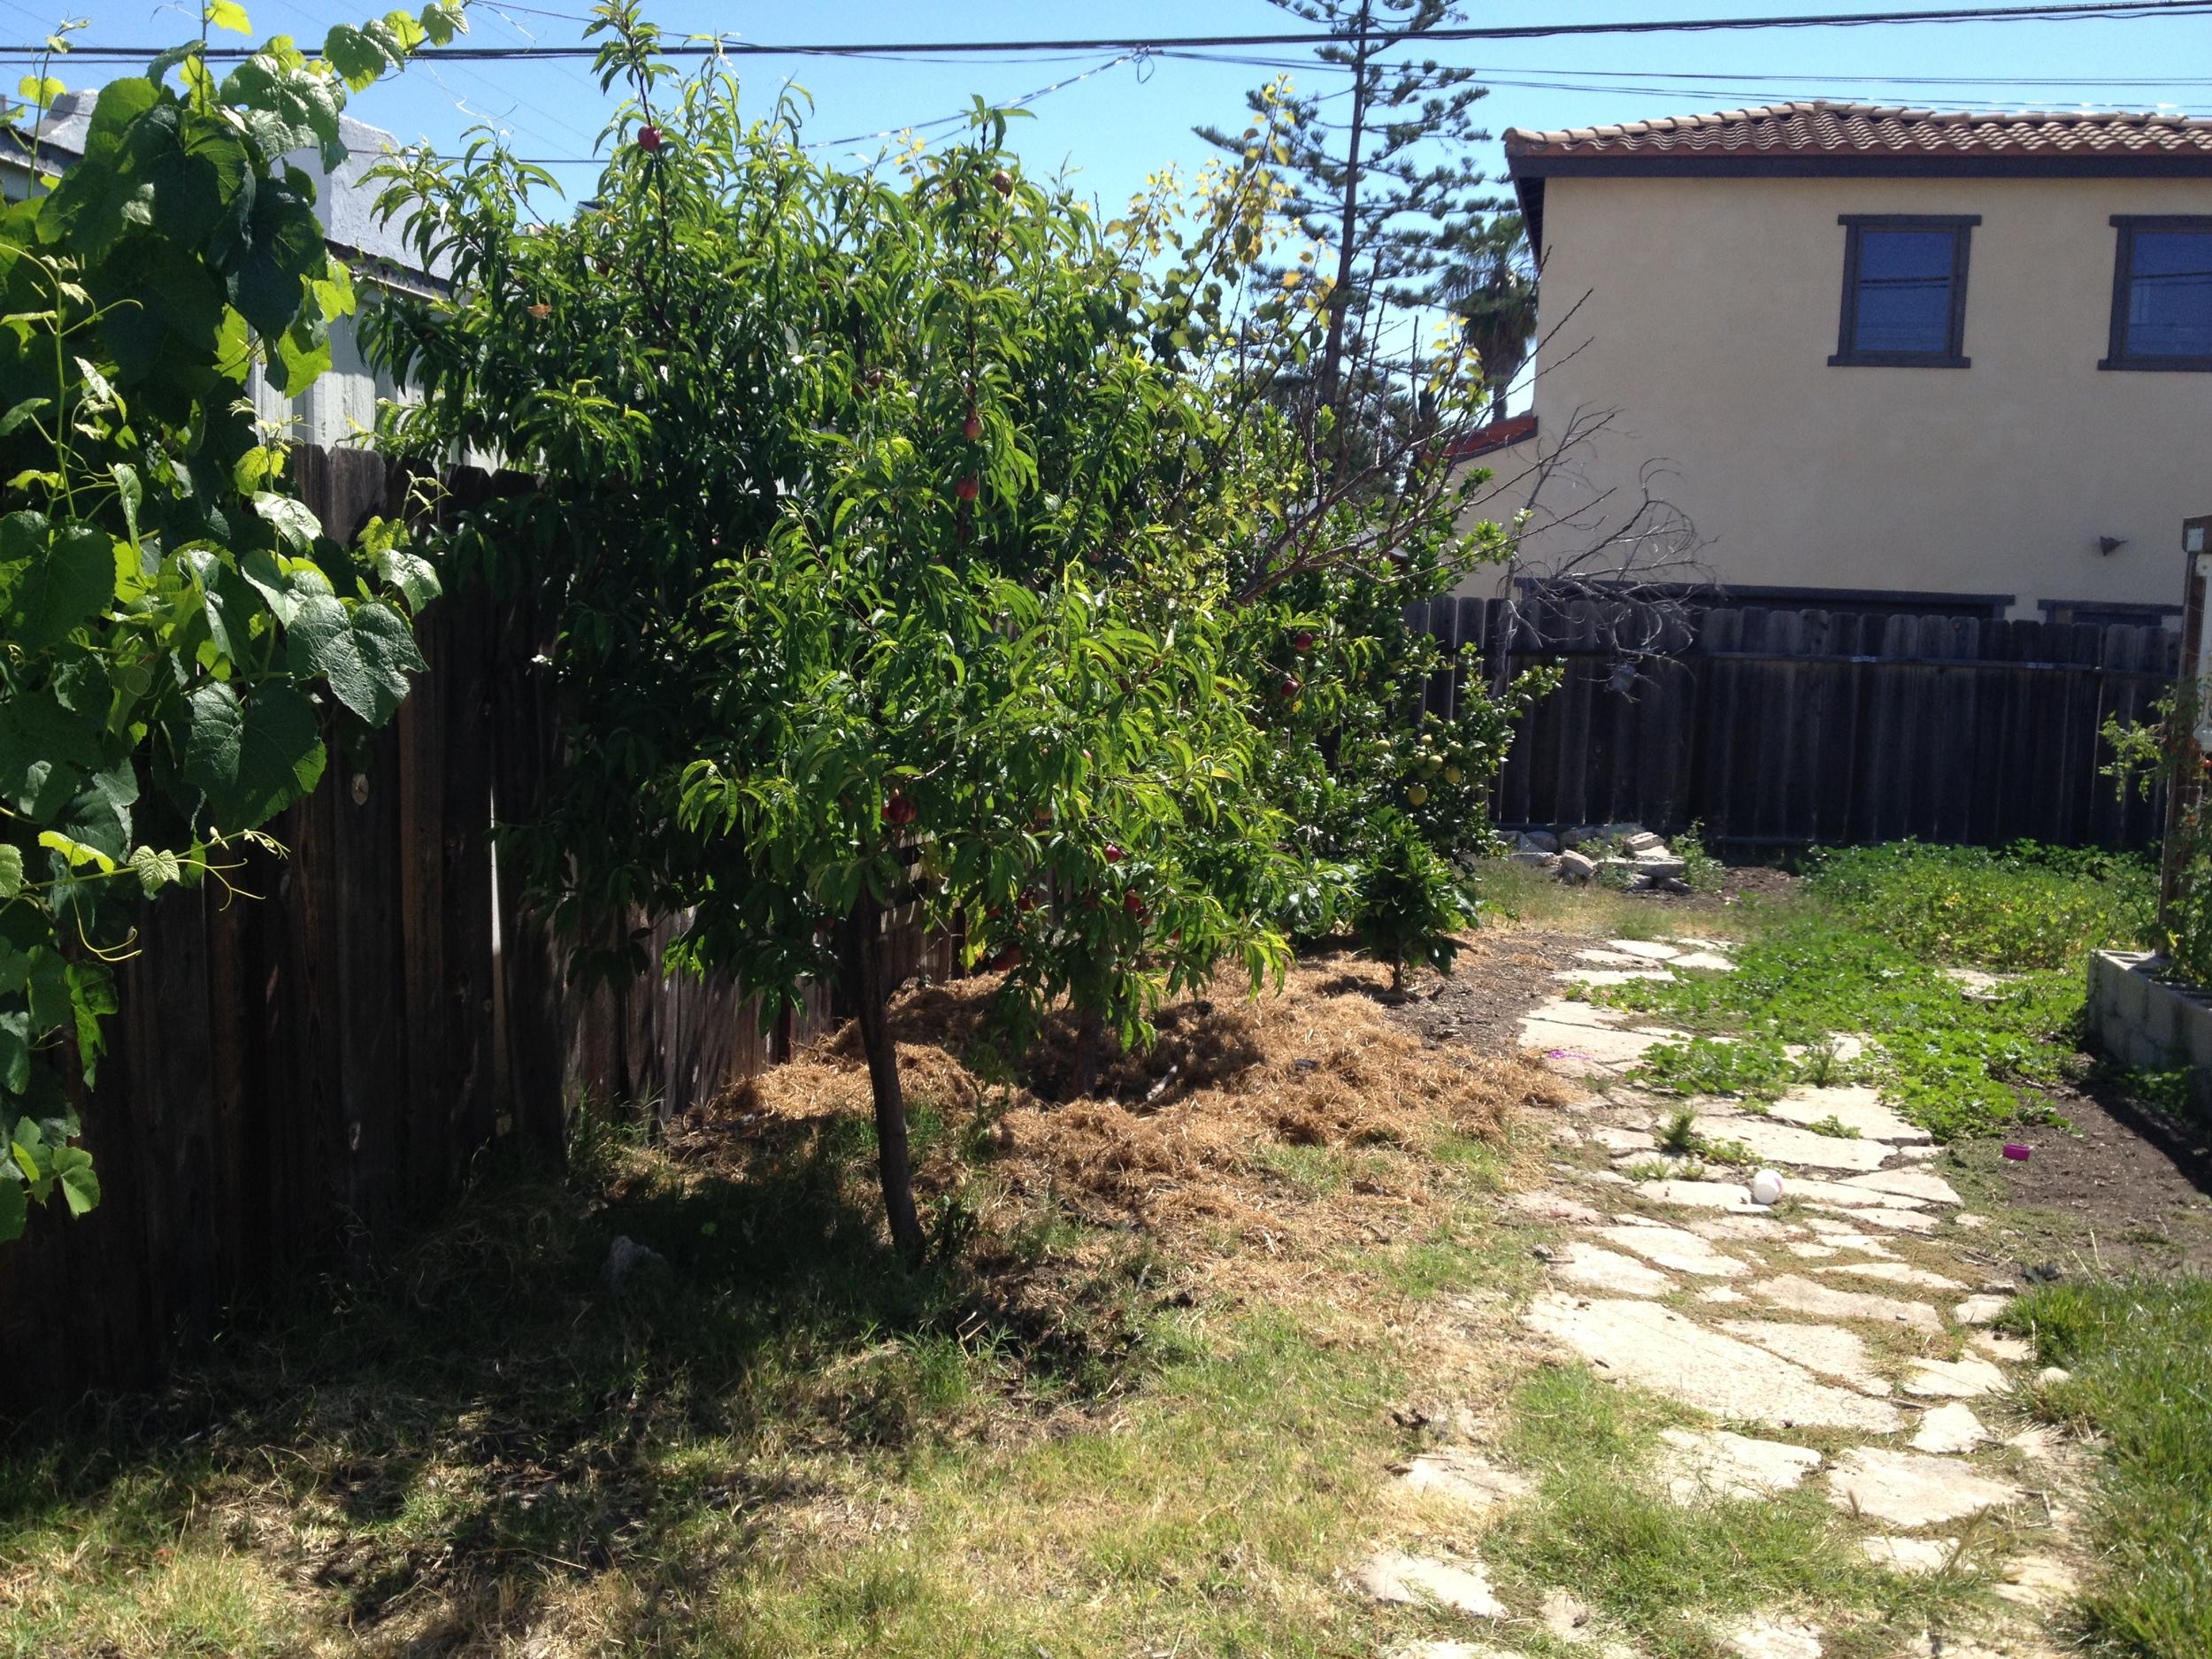 After: The same backyard in Normal Heights 3 years later. &nbsp;8 tree orchard growing off one family's weekly laundry water